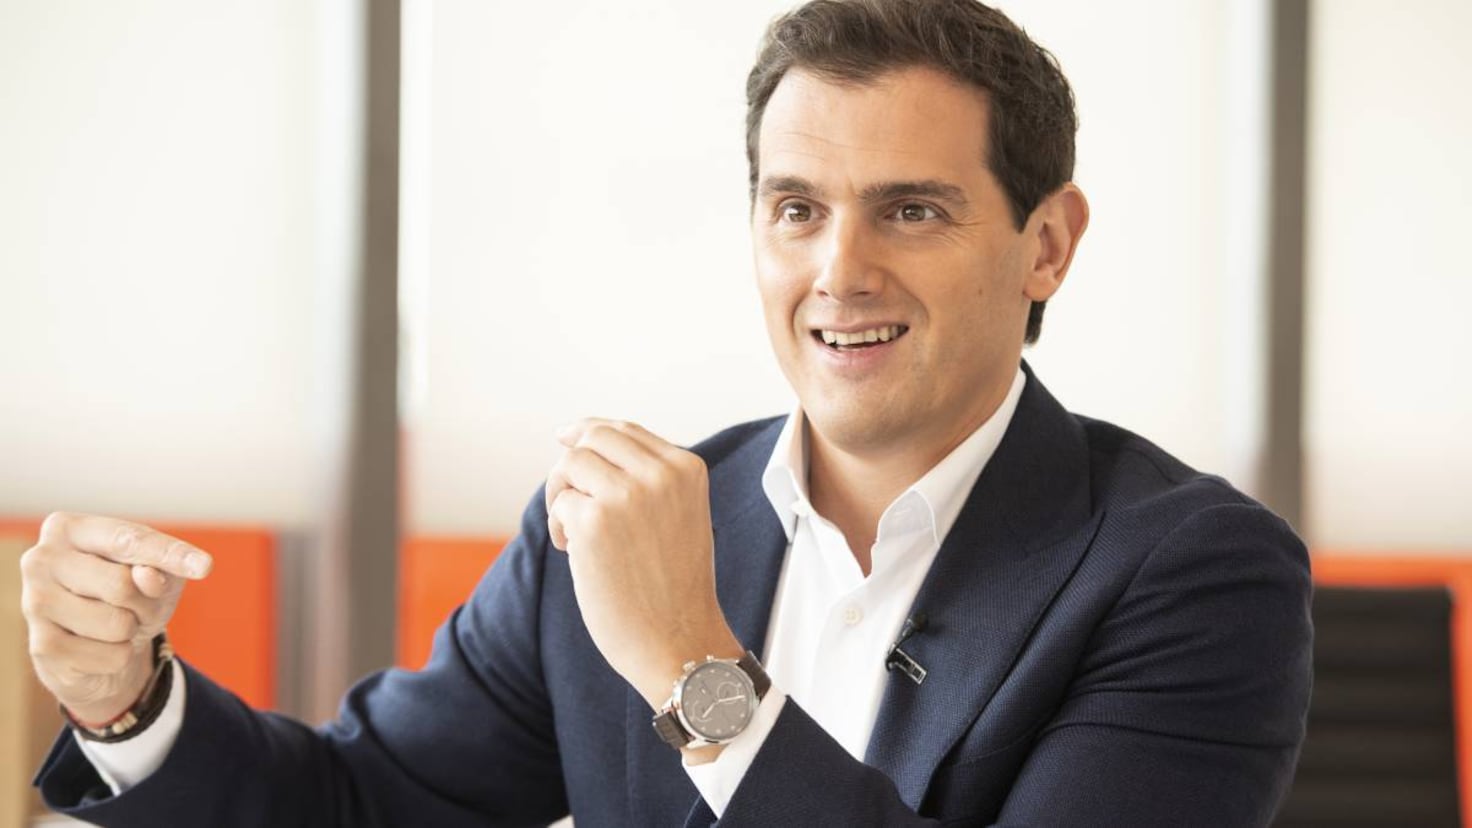 Albert Rivera's hint to Mal when asked about love and his partner
